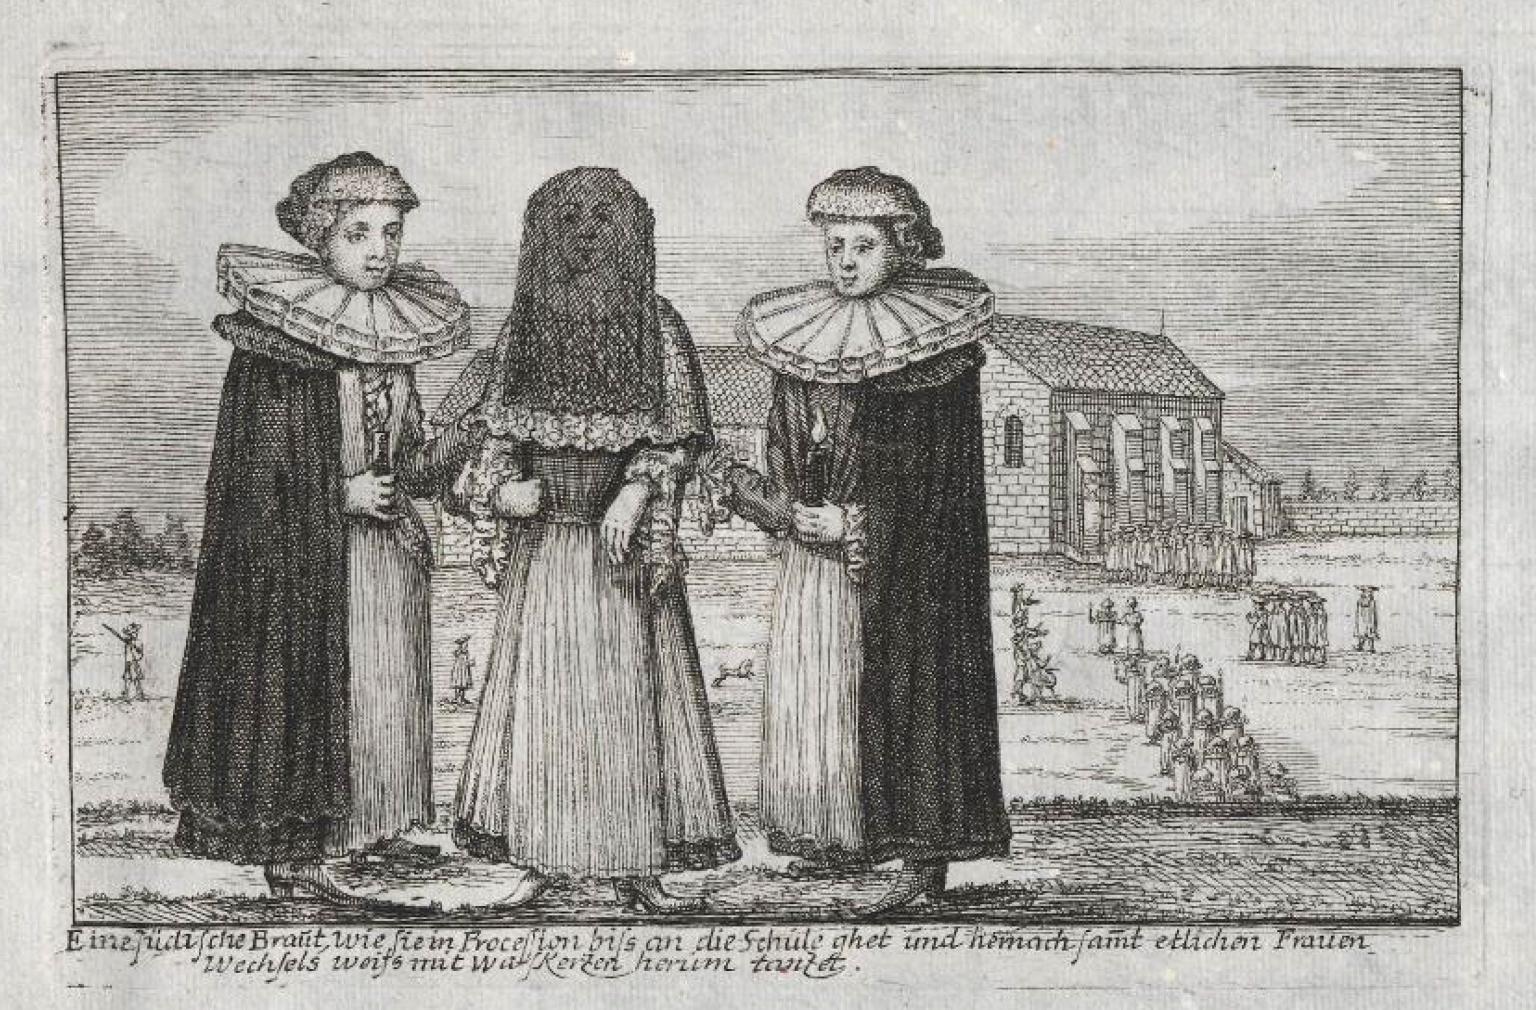 Print engraving of woman in veil flanked by two other women, standing before a stone building. 